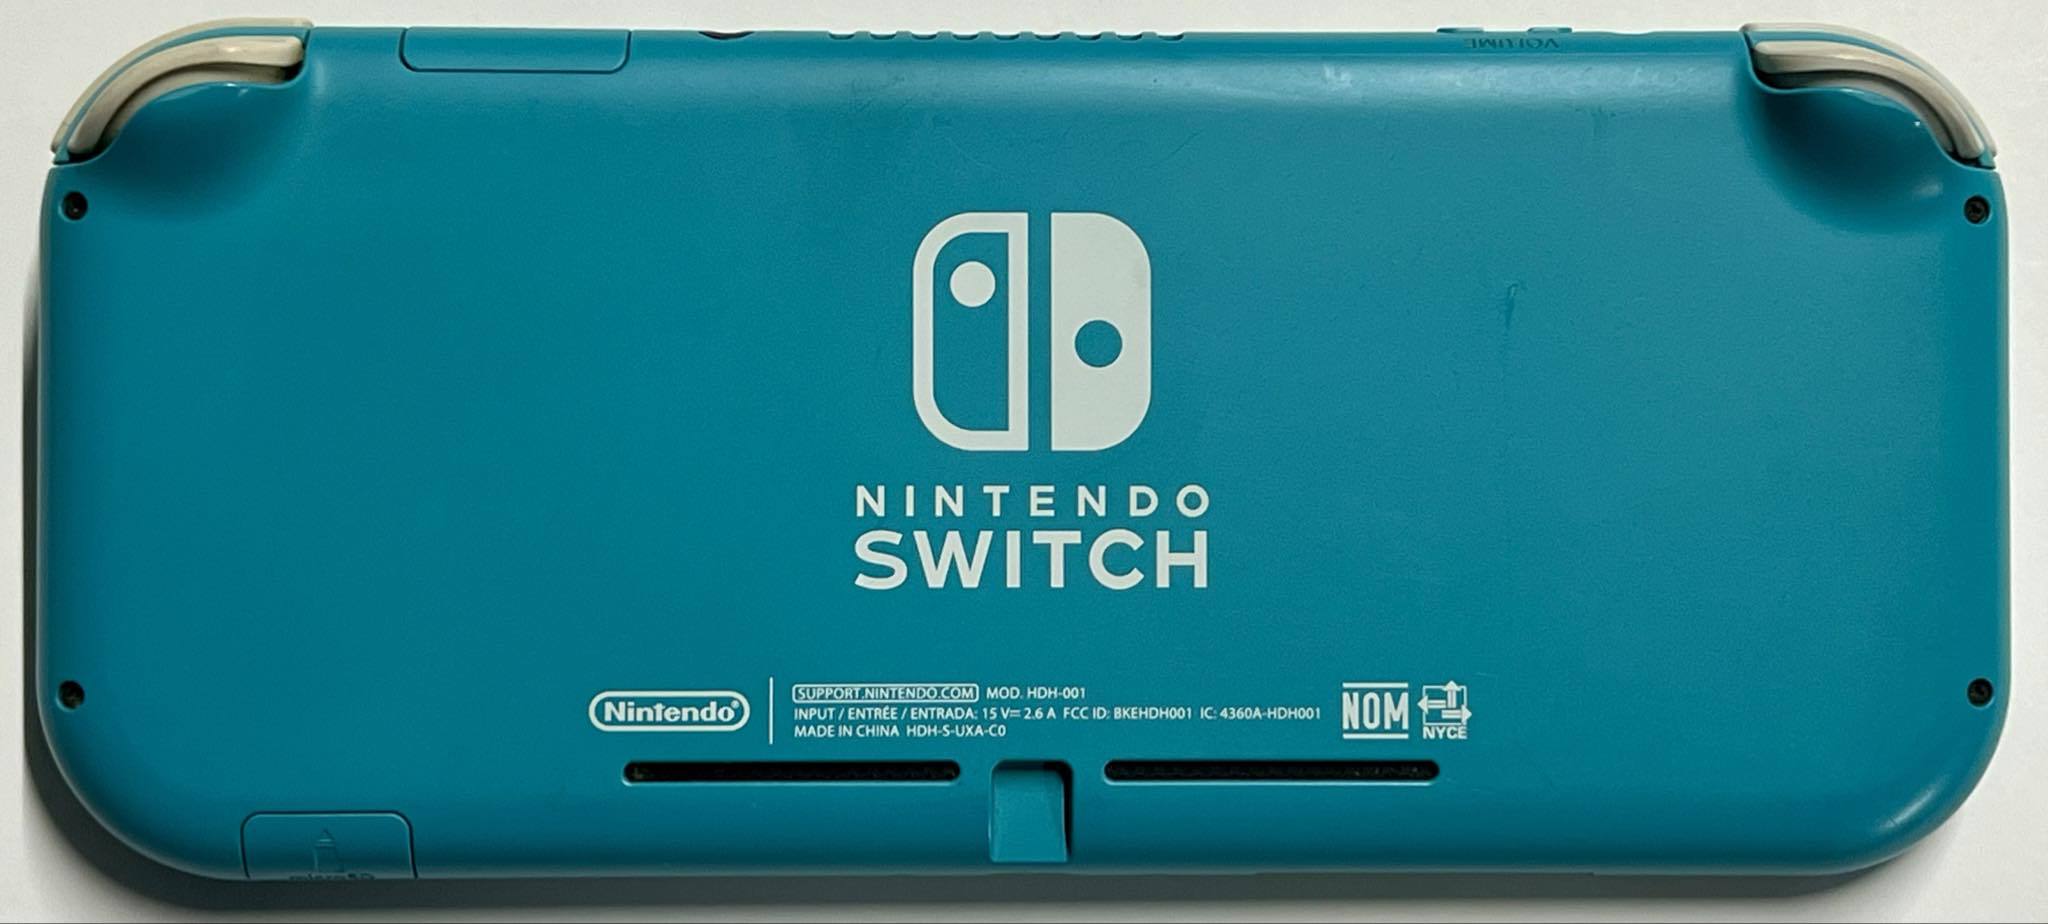 Nintendo Switch Lite - Turquoise - 128gb Memory Card - GAME NOT INCLUDED